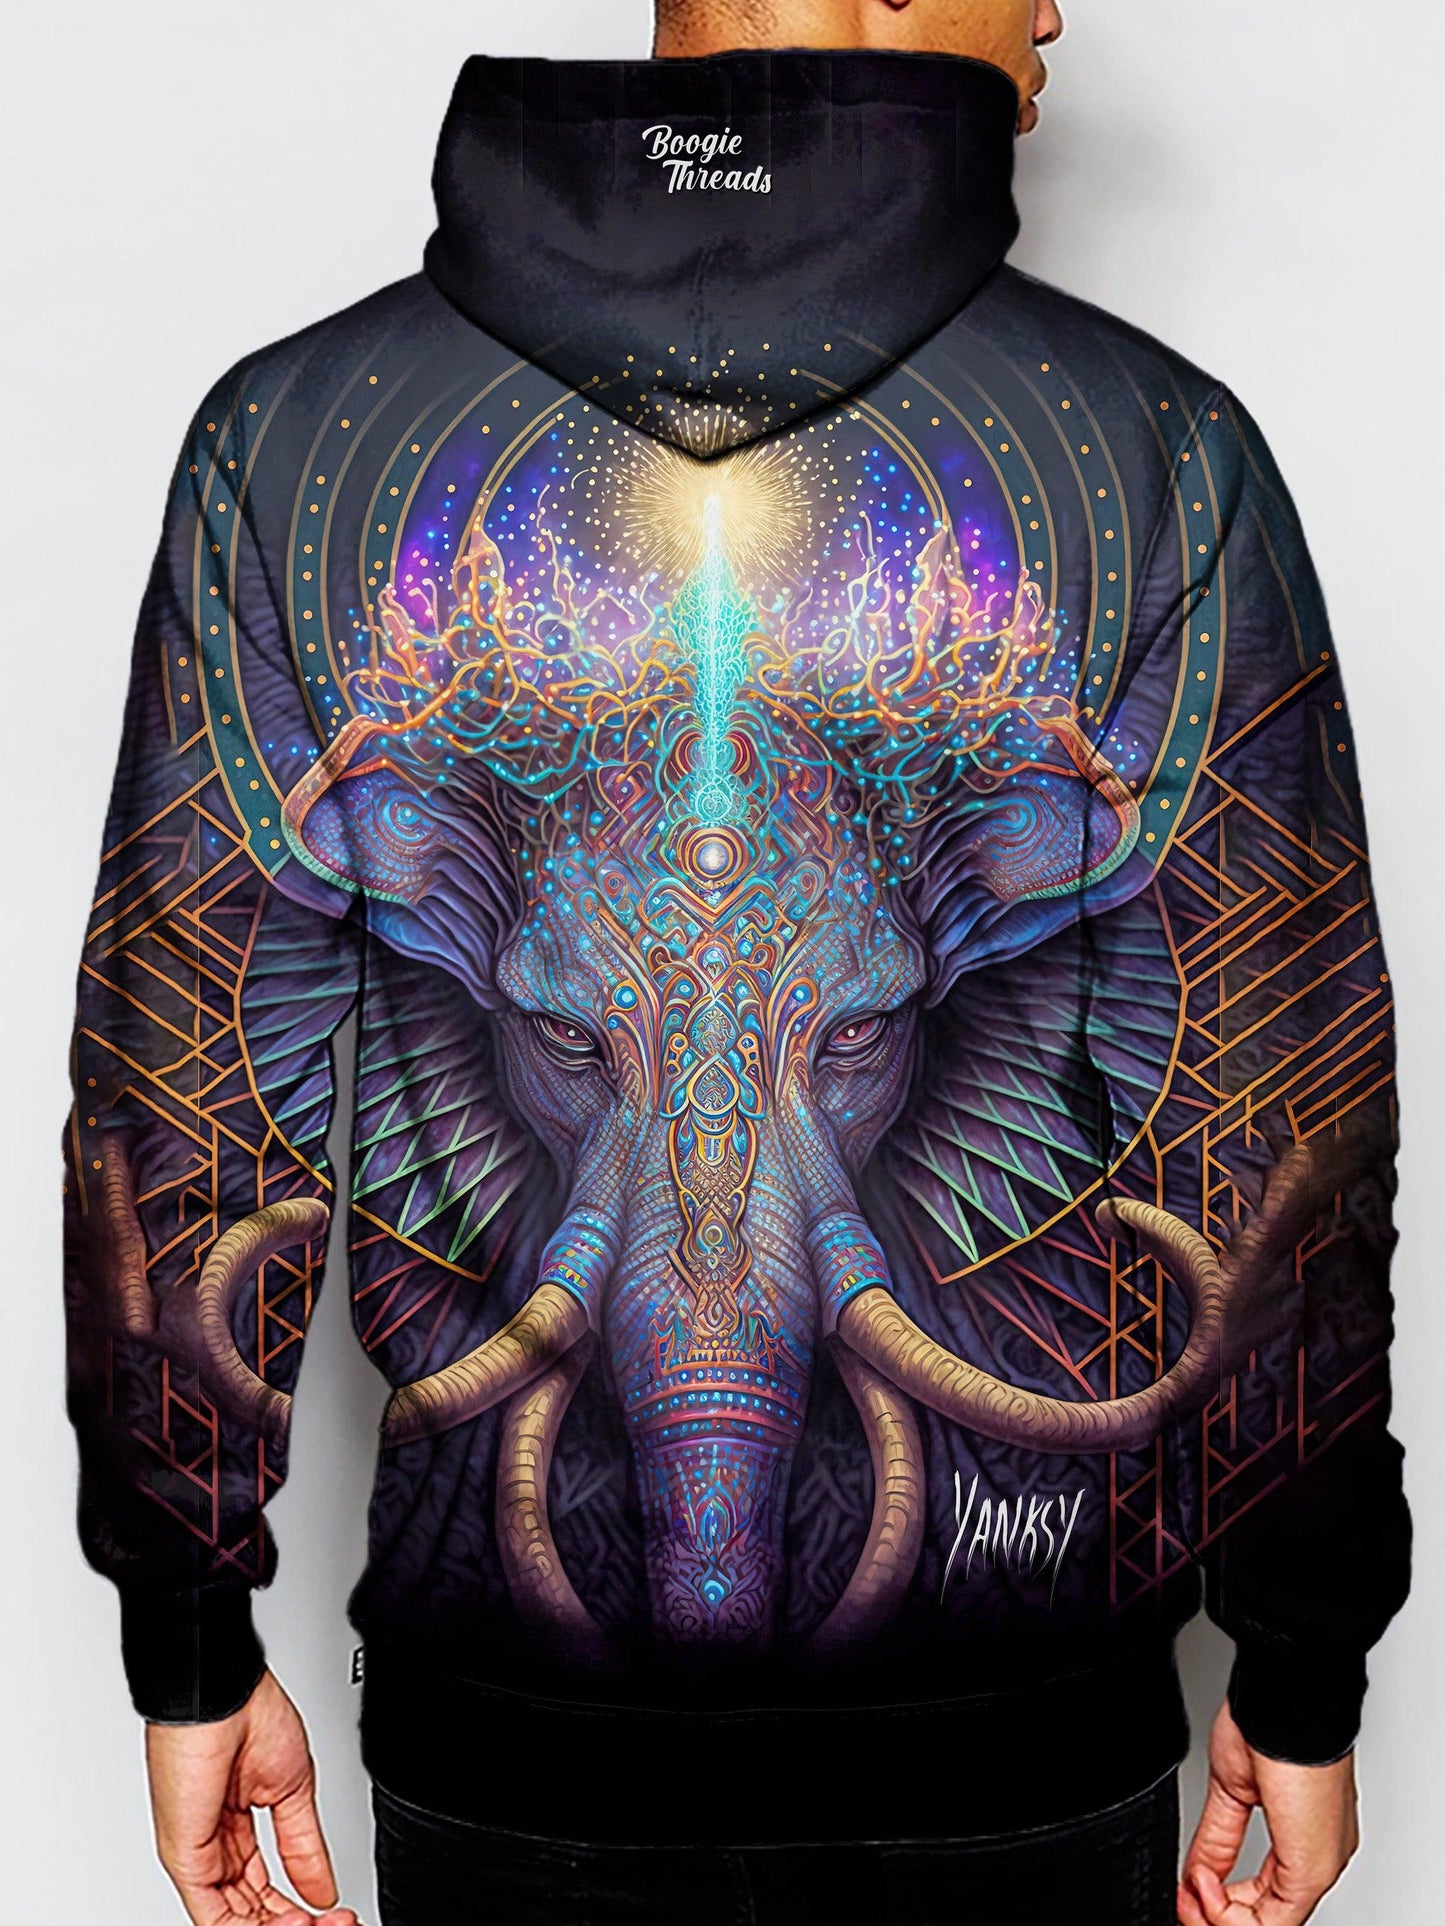 Get ready to enter a world of mesmerizing patterns and vibrant colors with this trippy hoodie